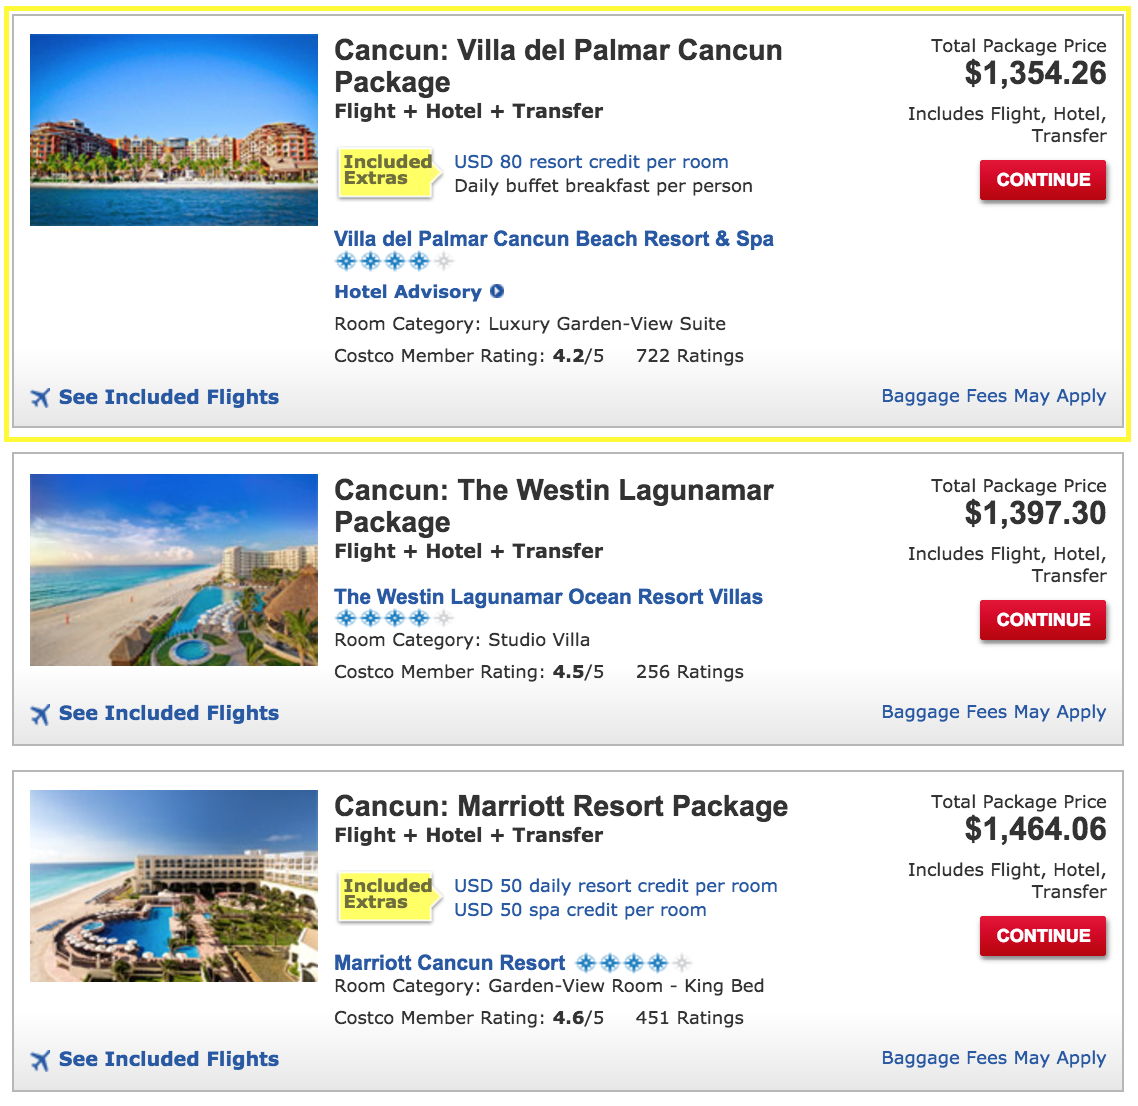 https://www.i1.creditdonkey.com/image/1/1200c/costco-travel-package-cancun.png